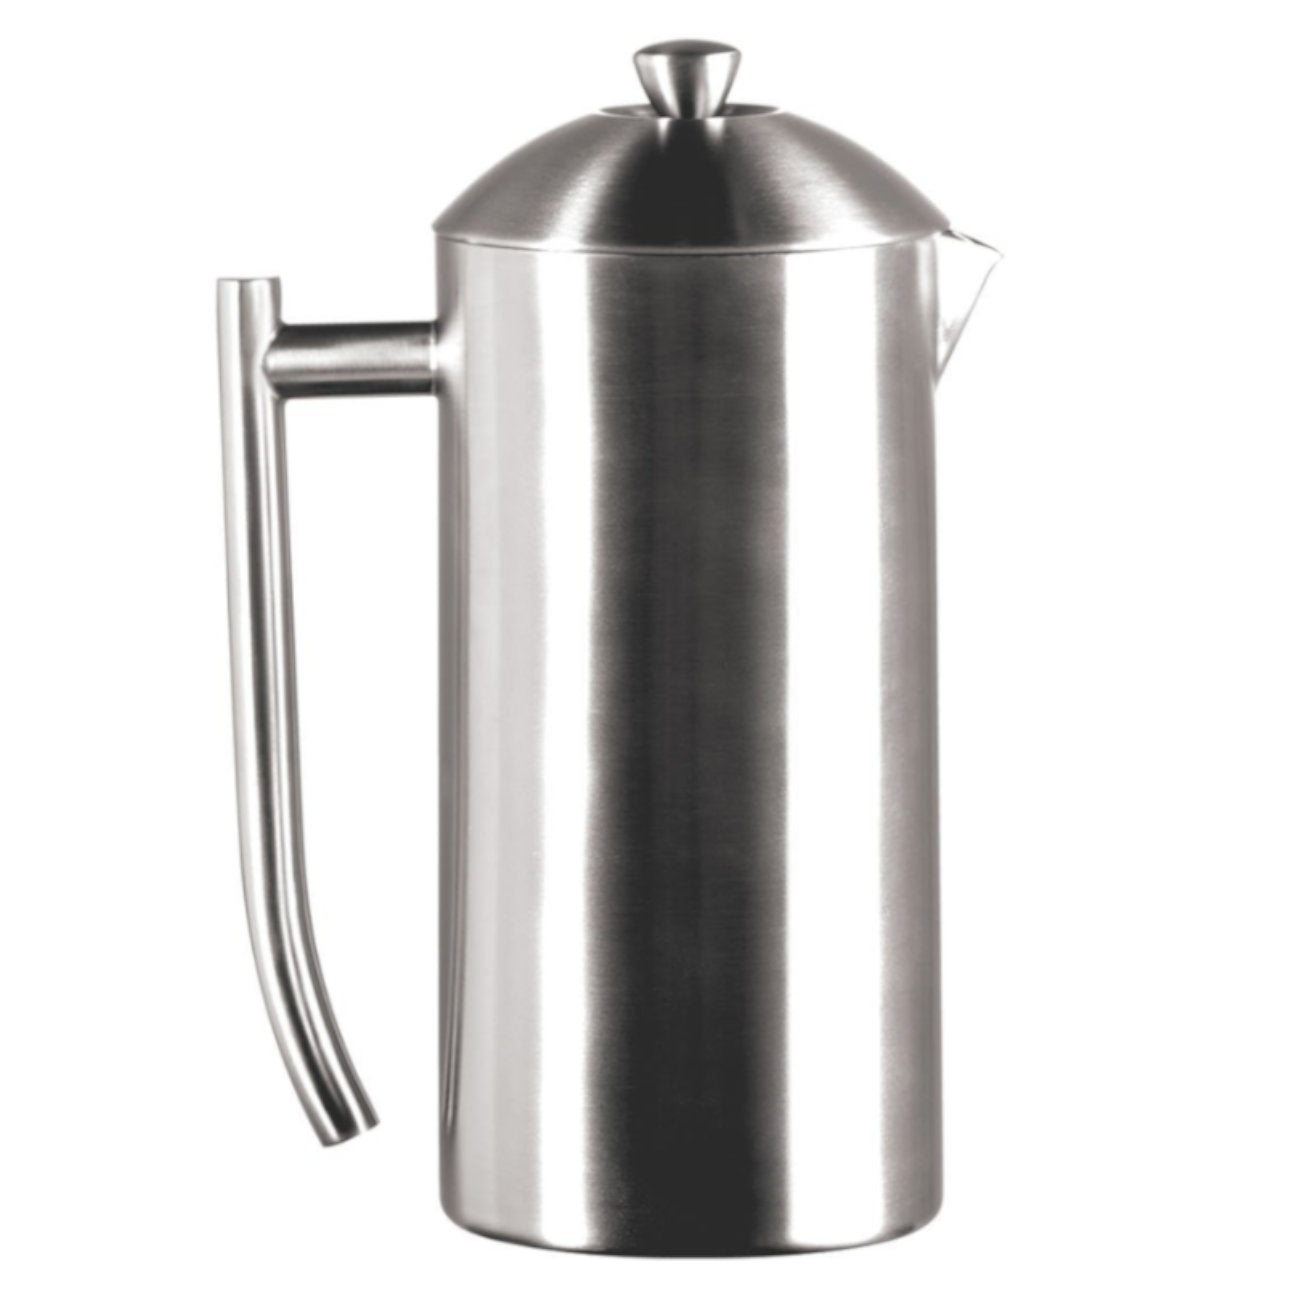 Frenchpress Zubereitung  19grams Brewguides – 19grams Specialty